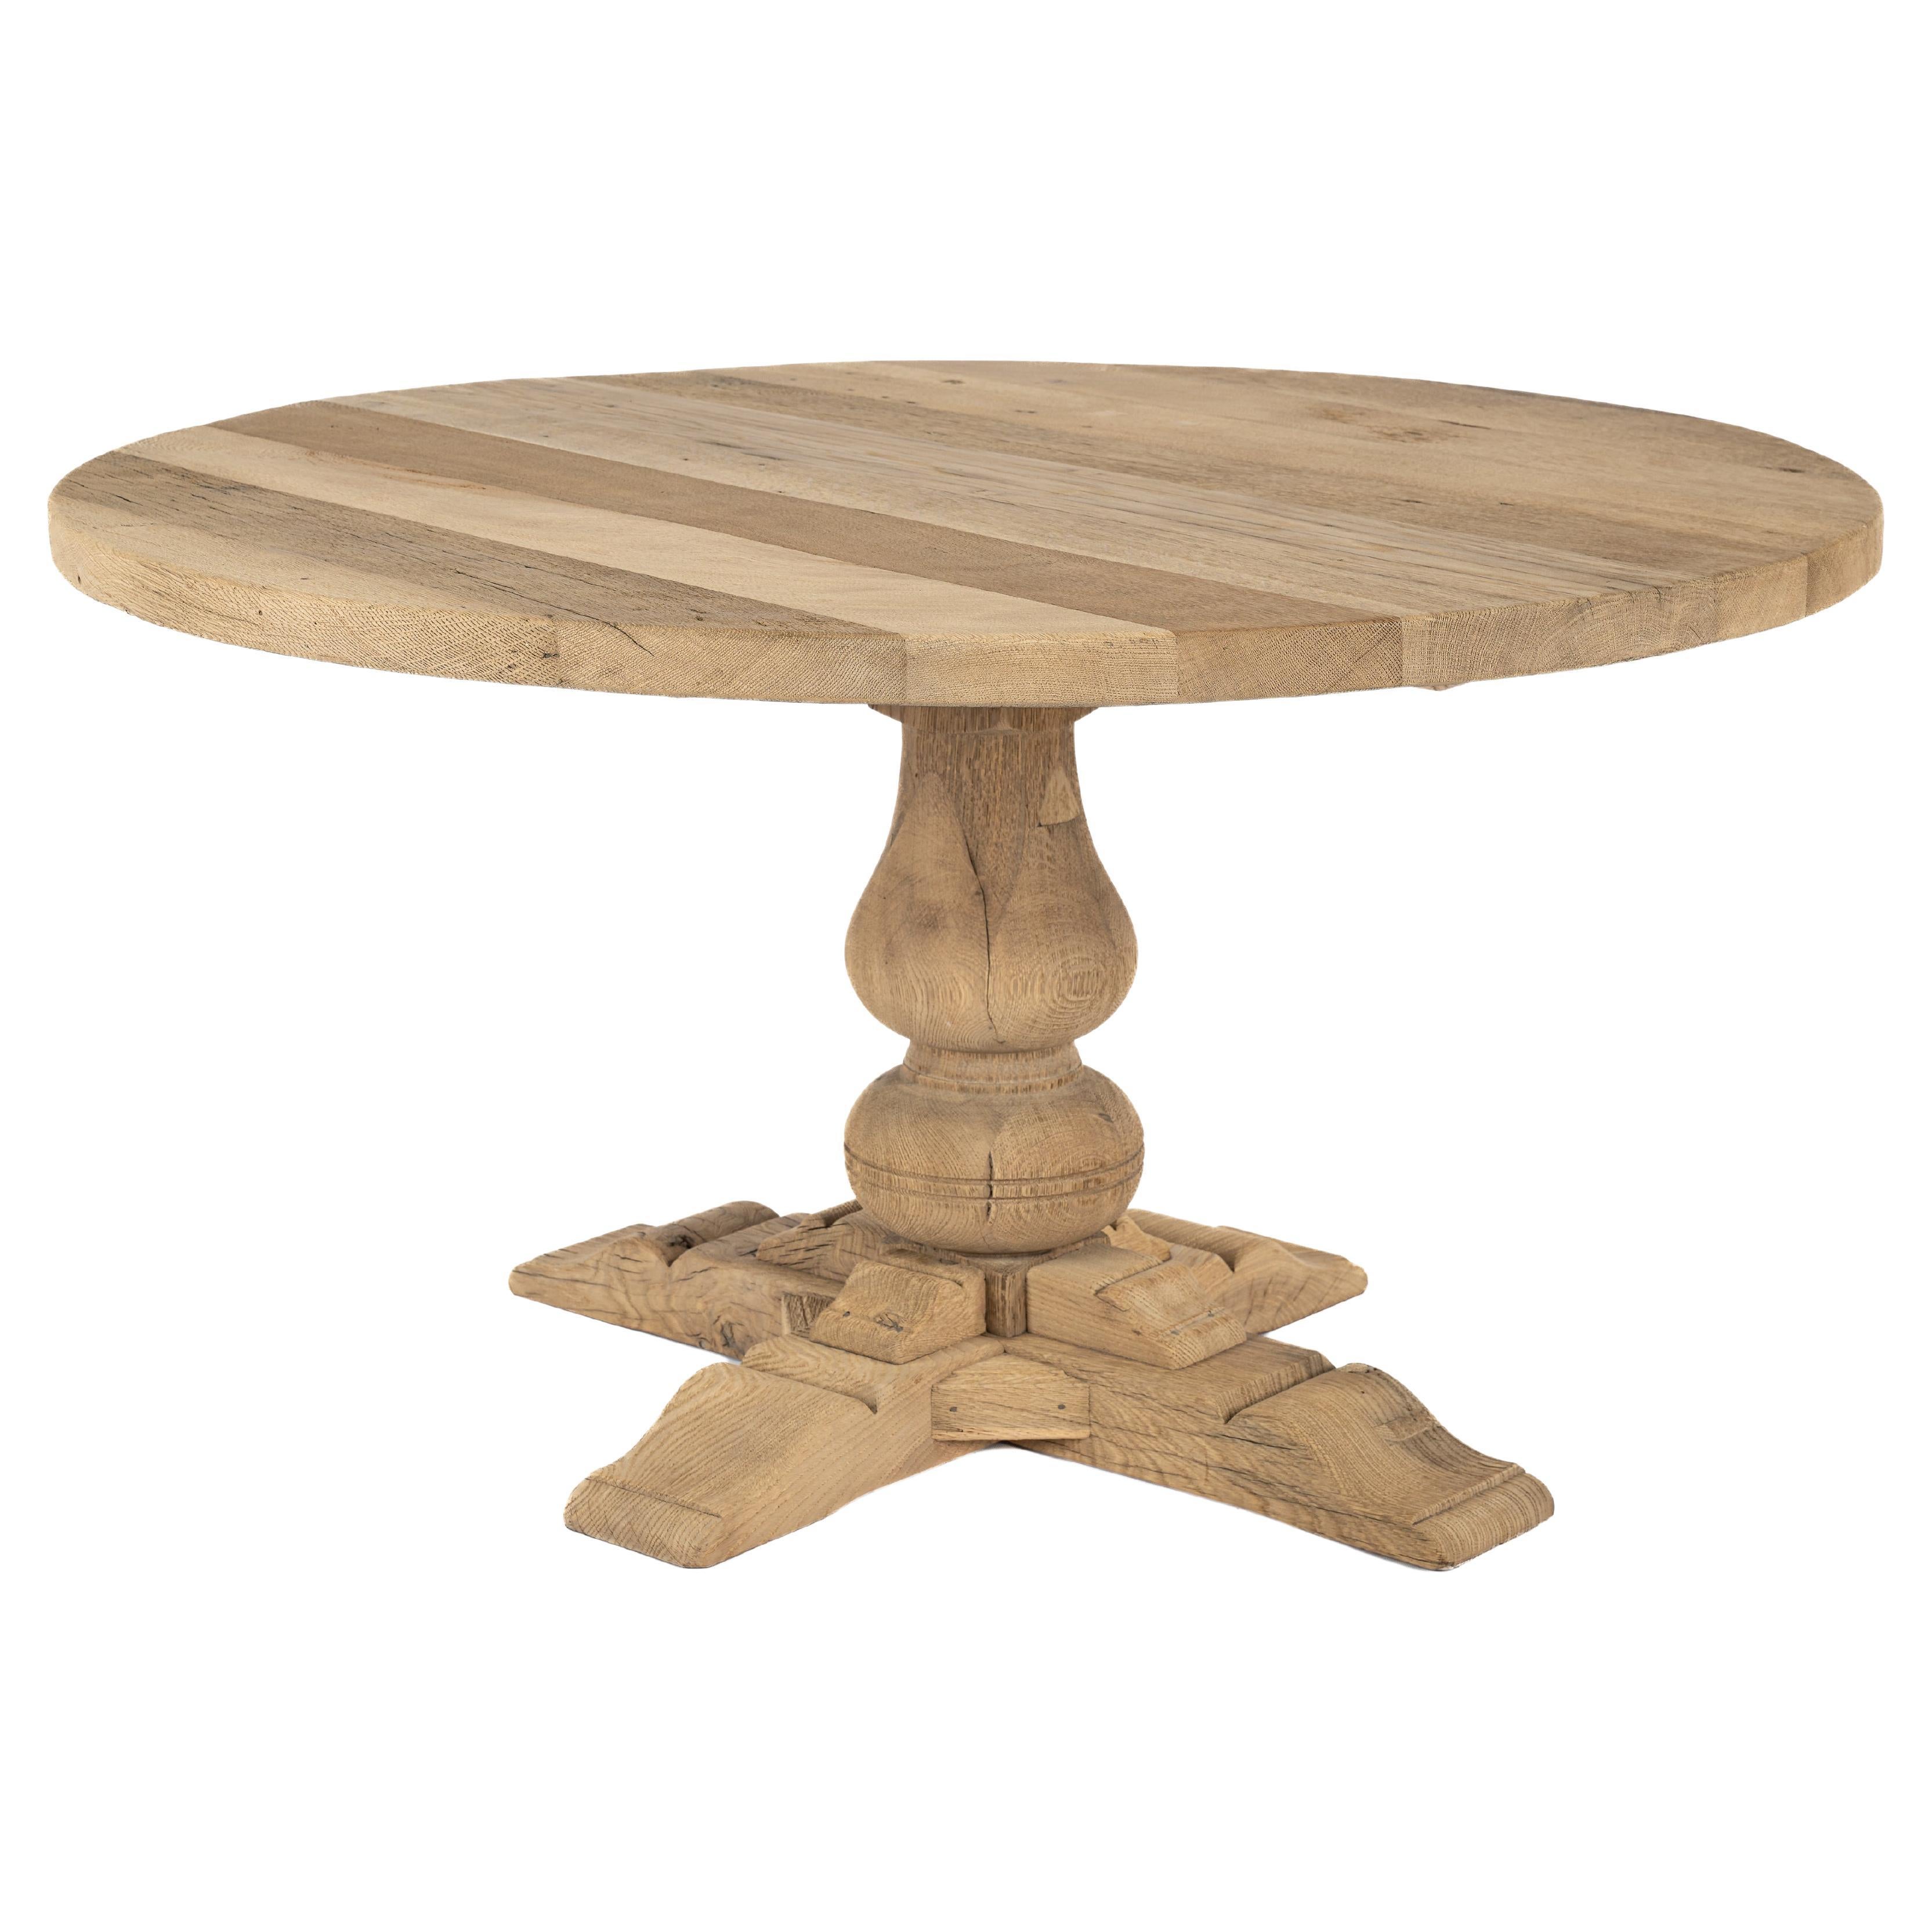 Rustic Round table in solid reclaimed and weathered oak on a central column For Sale